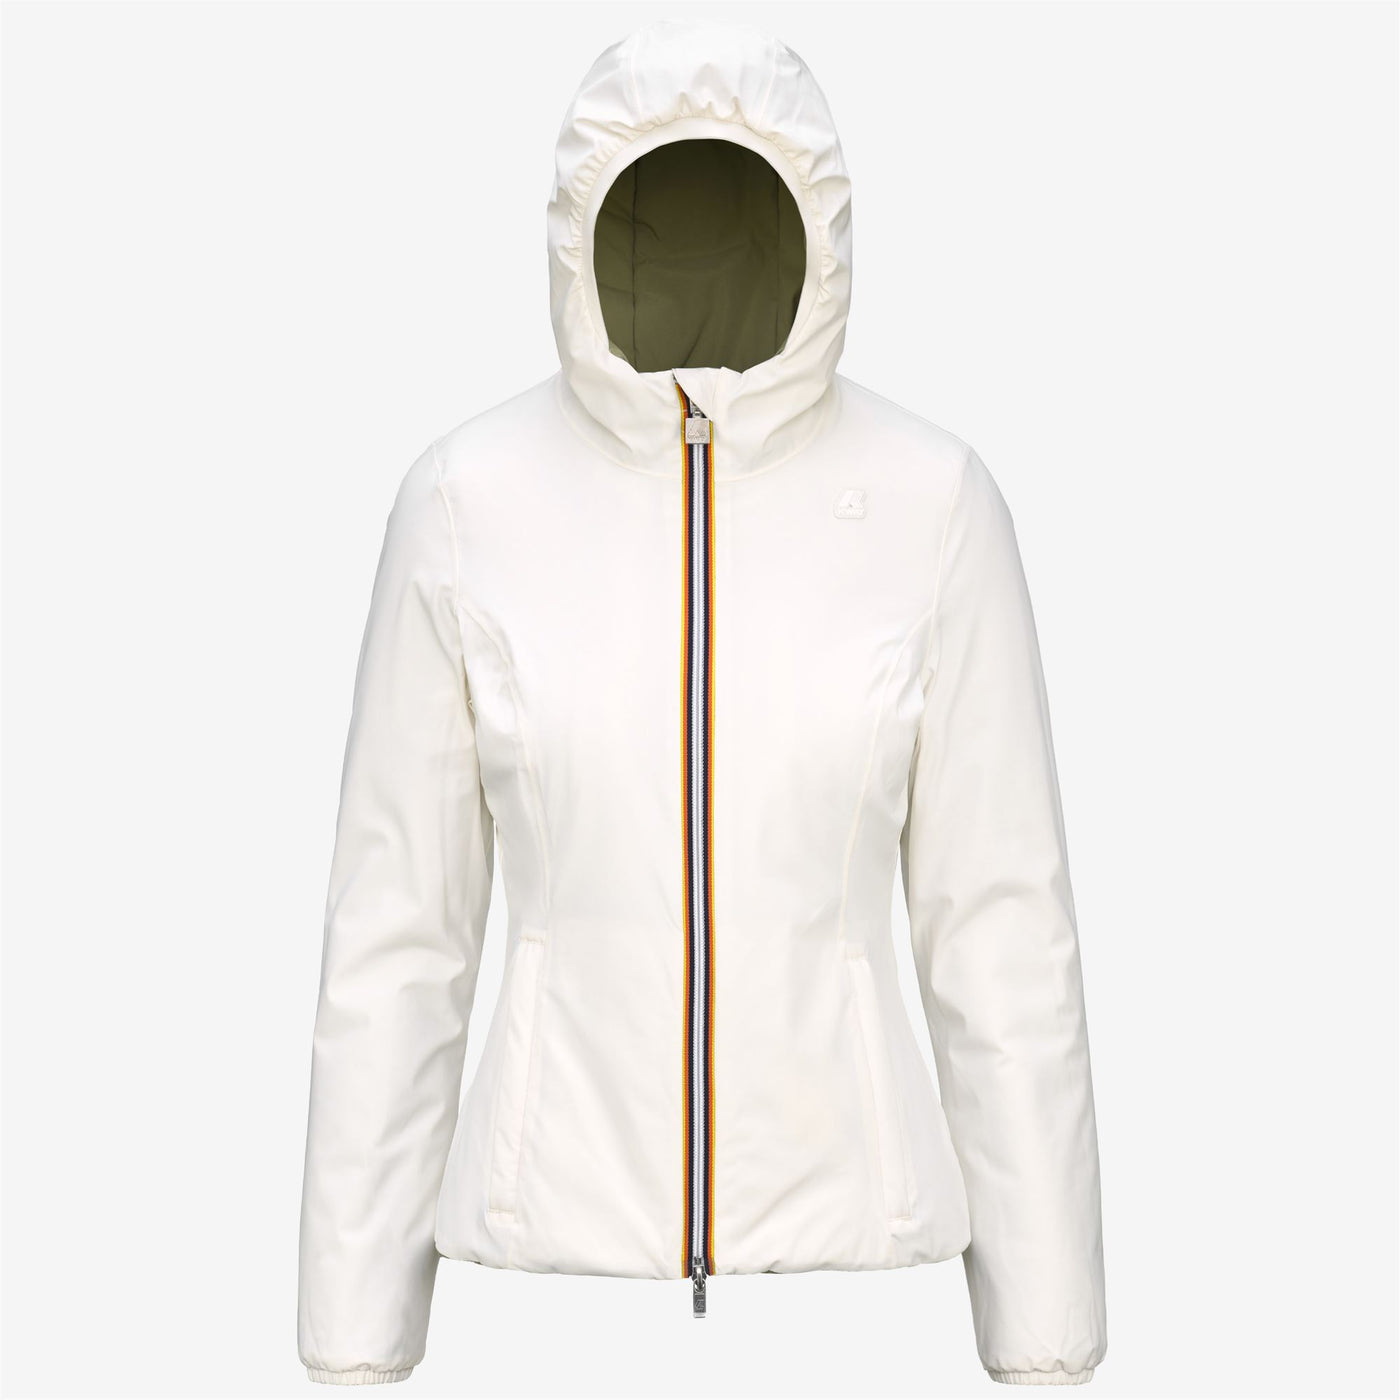 Jackets Woman LILY WARM DOUBLE Short WHITE G-GREEN S Photo (jpg Rgb)			